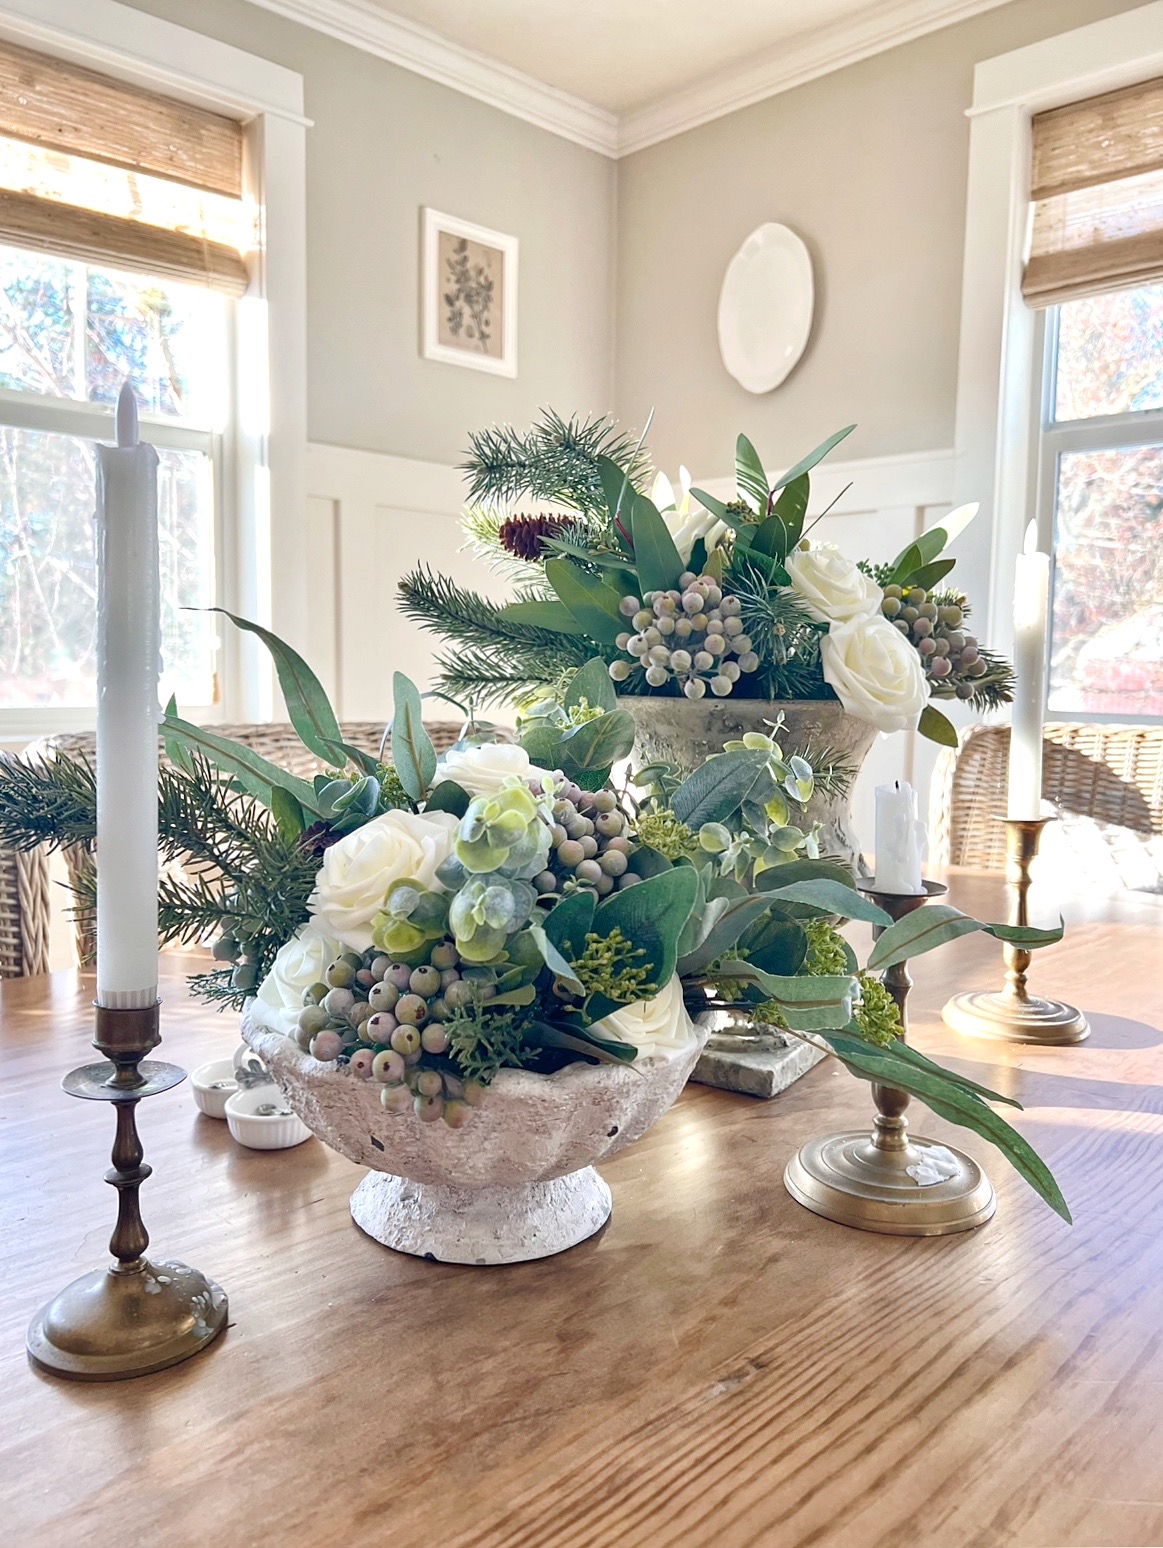 Close up view of winter flower bouquet made of green eucalyptus, green pine, white roses, and green-blue frosted berries.